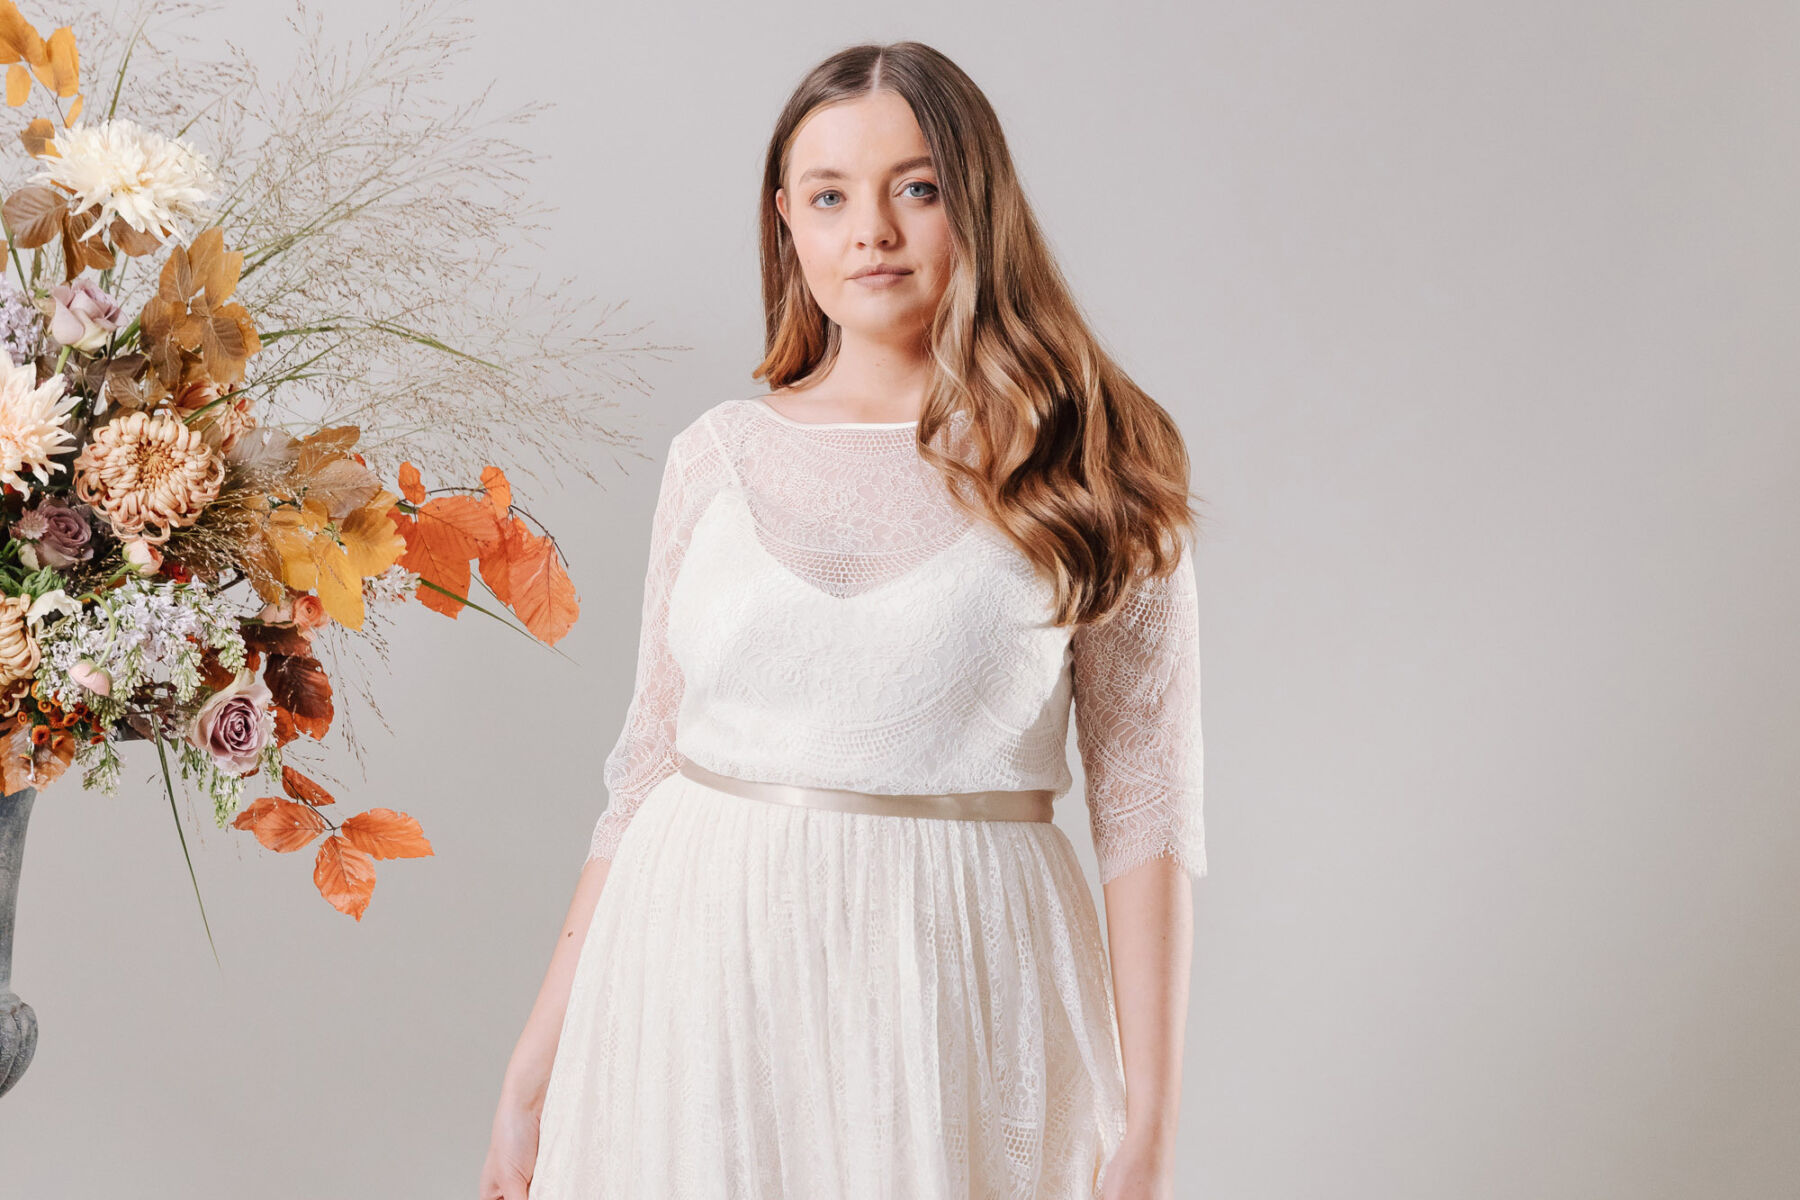 Kate Beaumont, Beautiful, Ethical & Flattering Wedding Dresses for Curvy Brides & Women With Fuller Figures